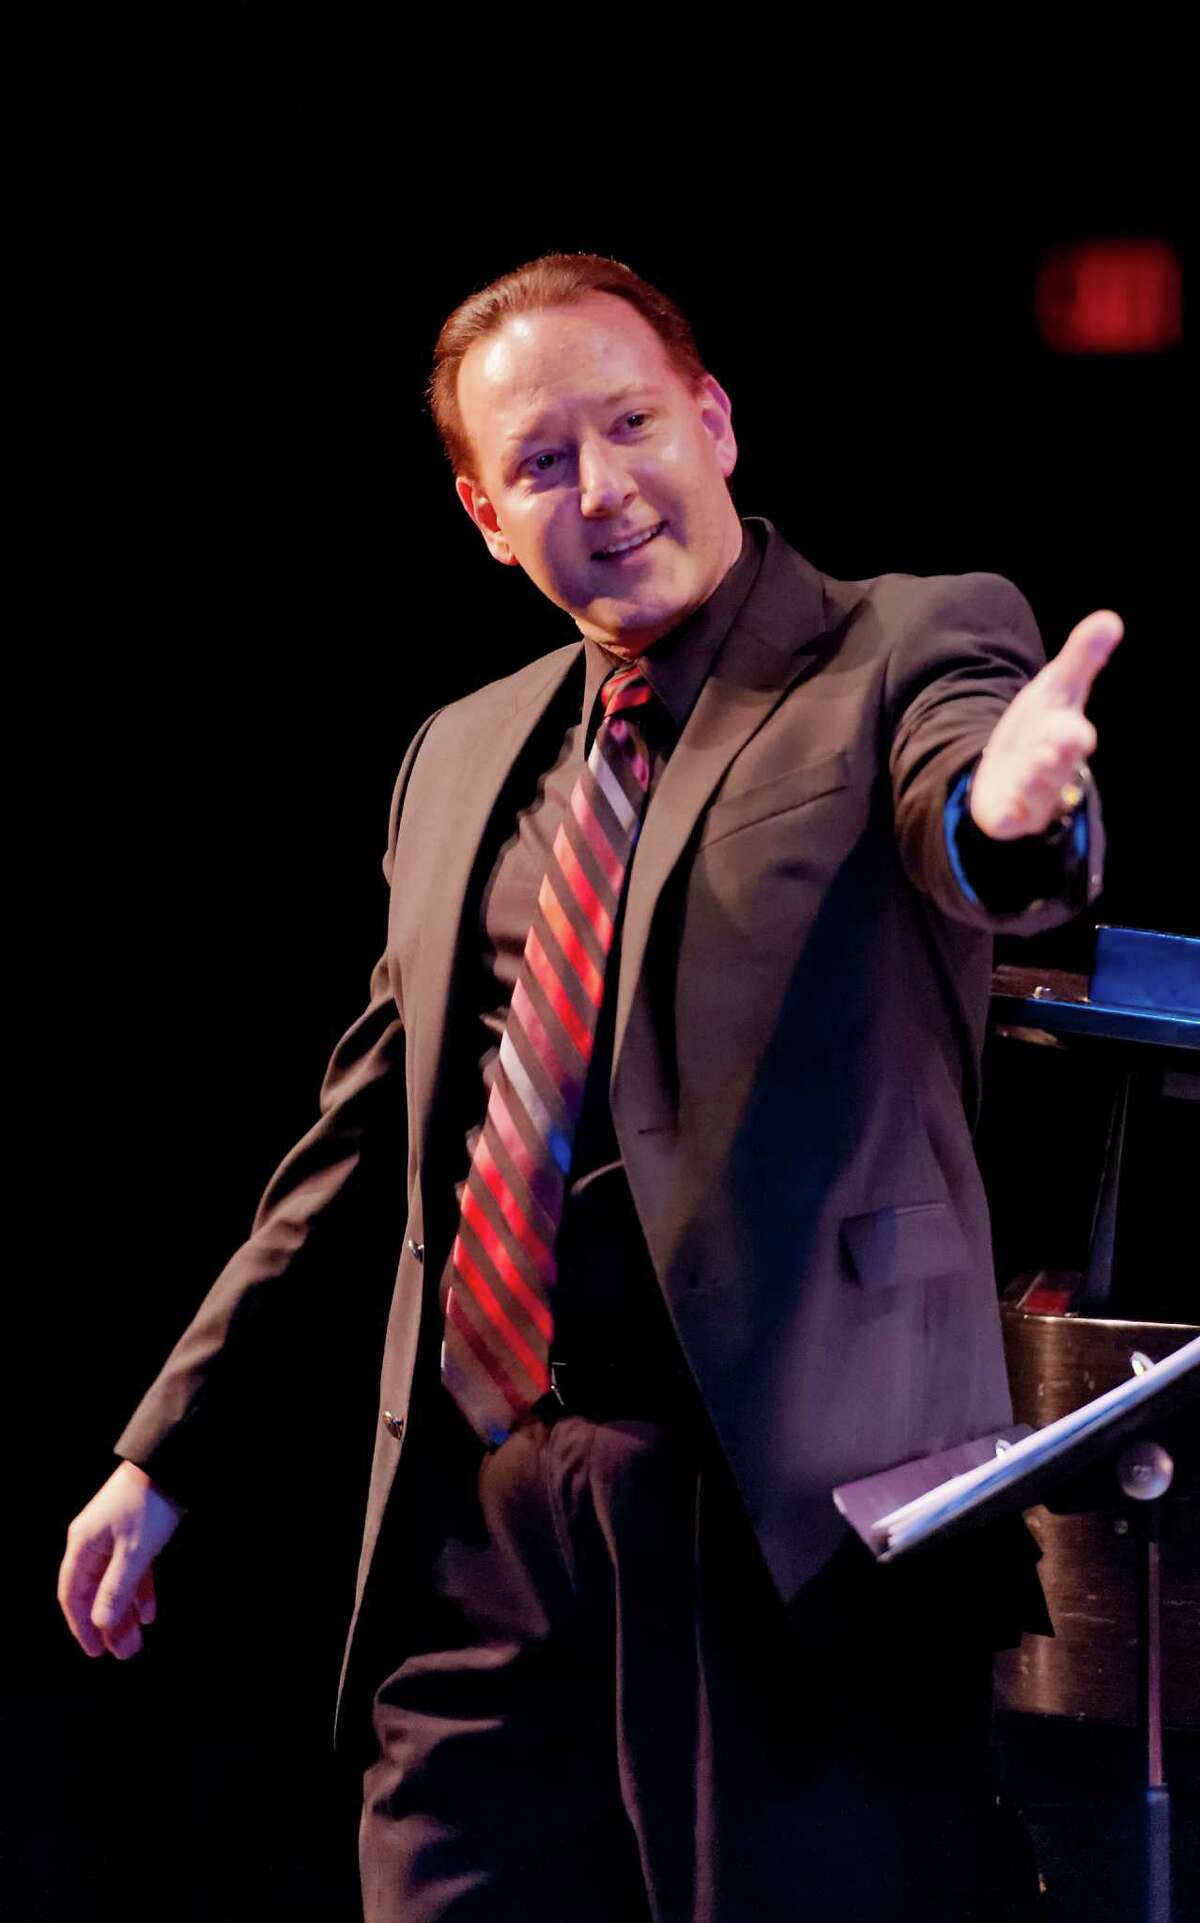 Galen Tate, assistant director of Sacred Heart University's choral ensembles, will be one of the conductors of "How Can I Keep From Singing?" concert Saturday, March 23, on campus in Fairfield.